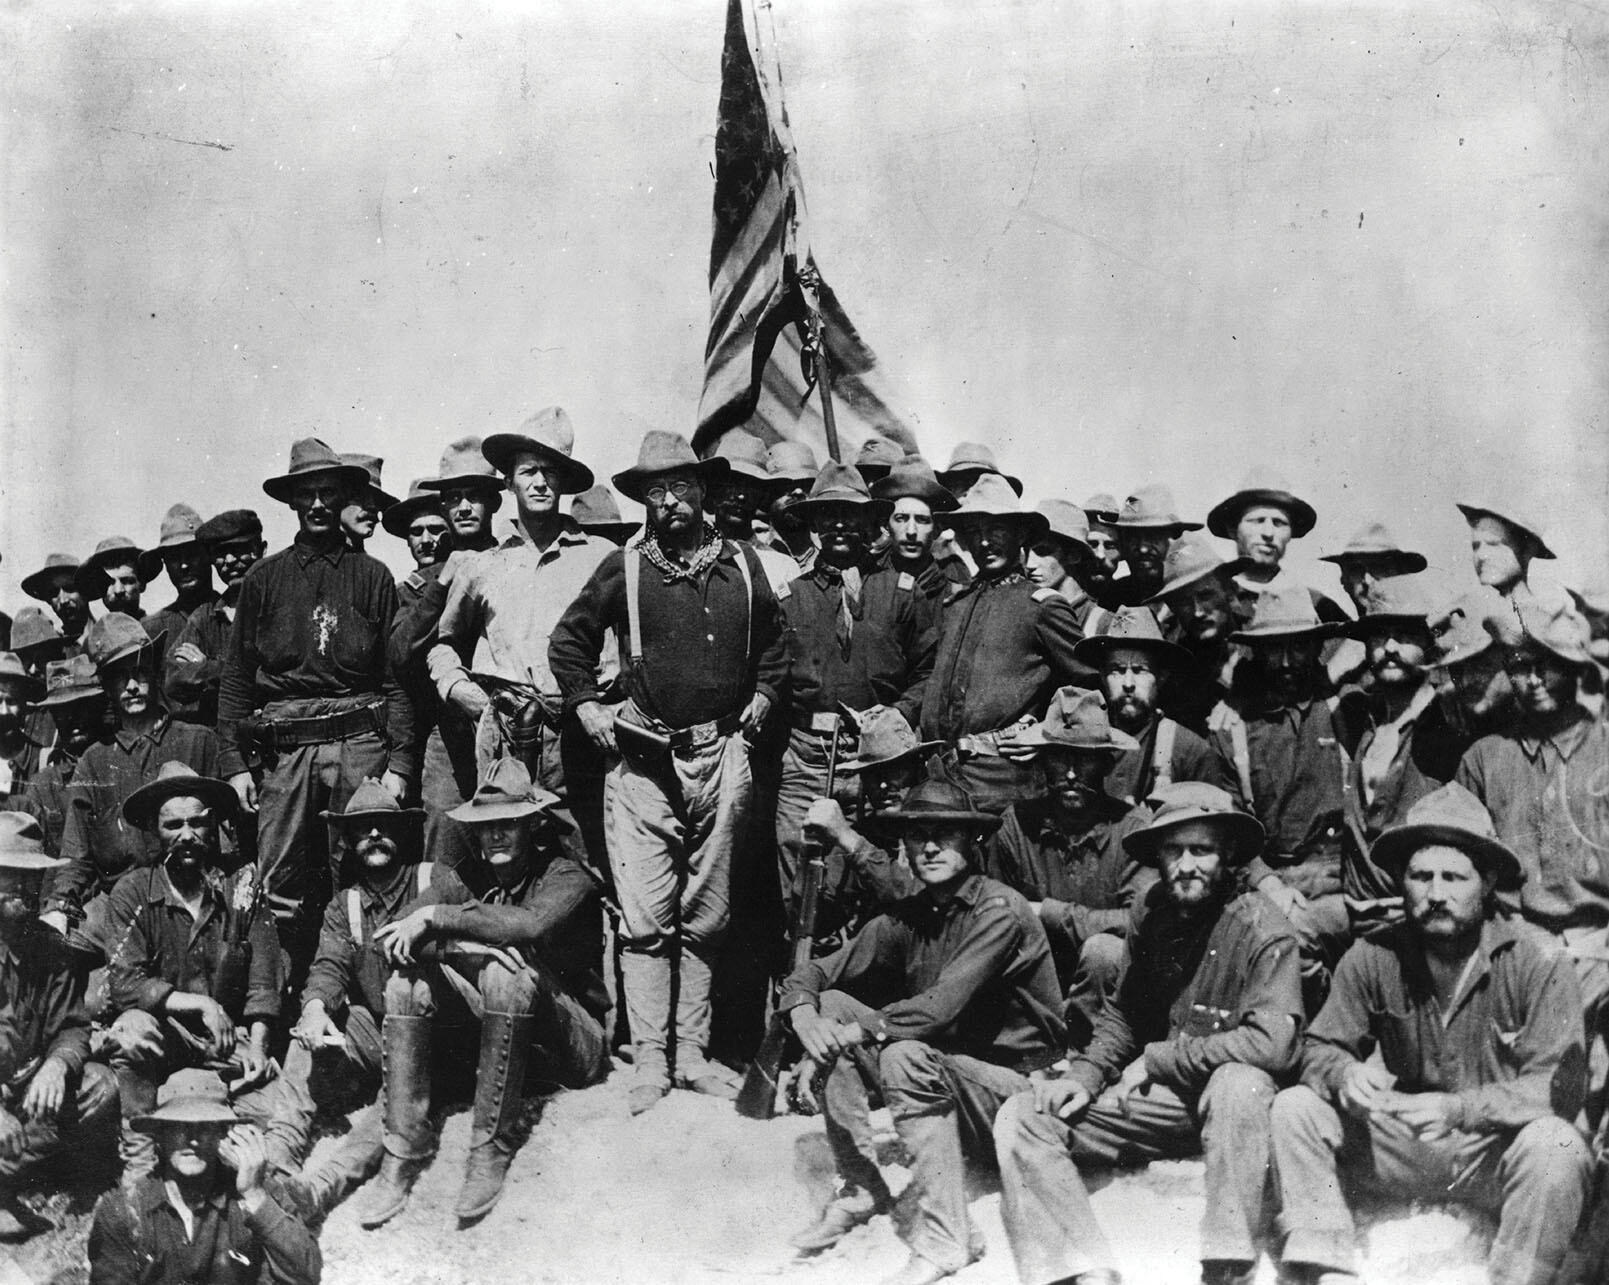 Theodore Roosevelt poses with other U.S. volunteers on San Juan Hill in 1898. (Photo by William Dinwiddie.)